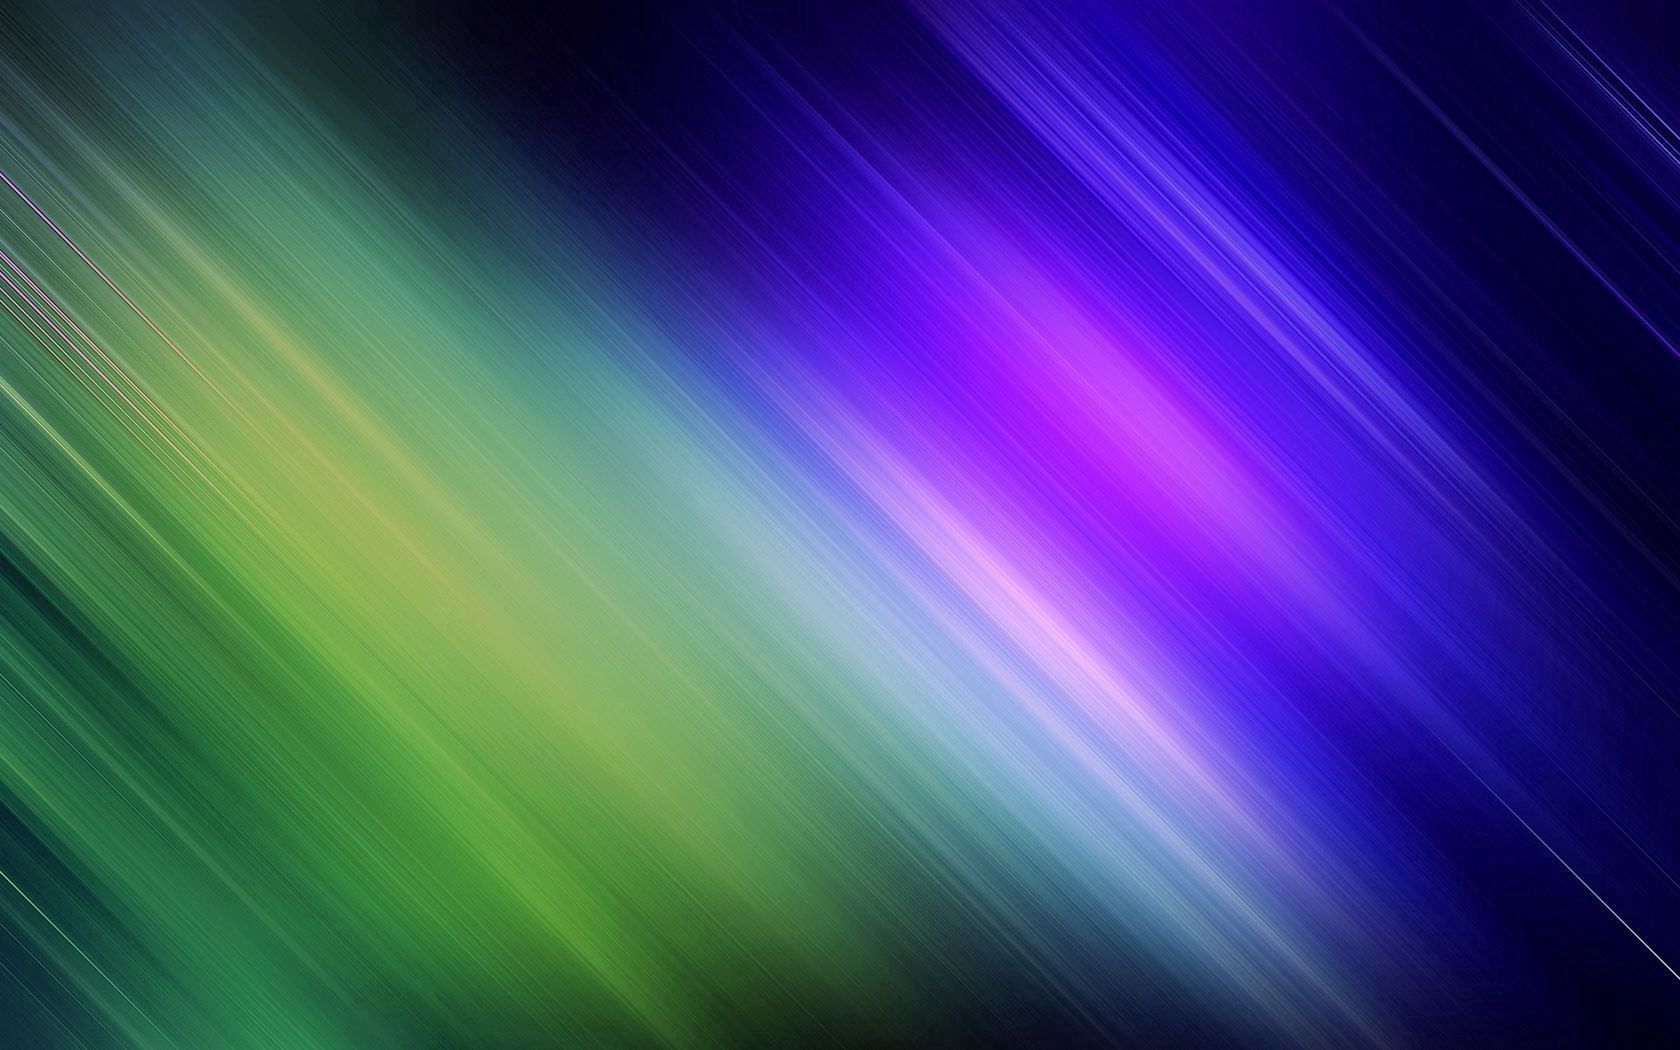 light, obliquely, abstract, shine, lines, light coloured wallpaper for mobile